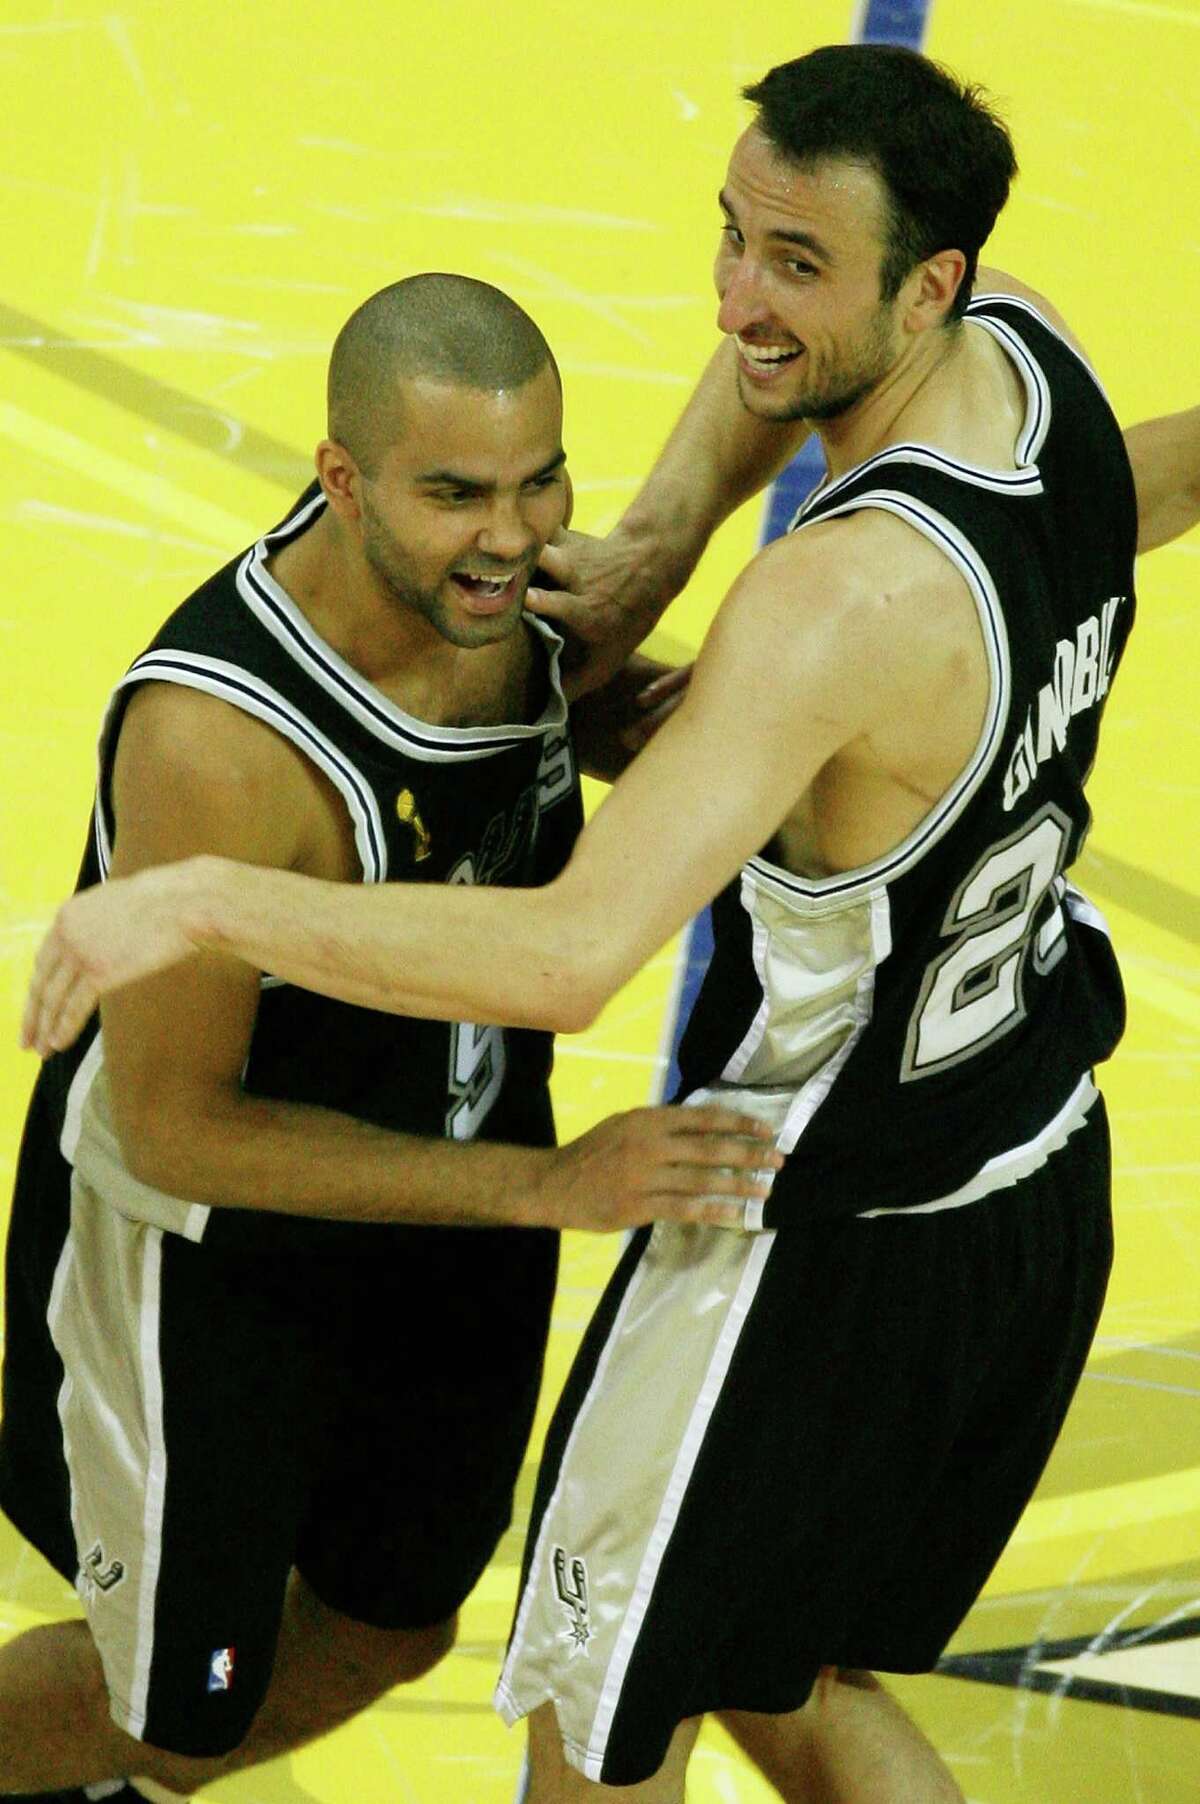 Manu Ginobili #20 and Tony Parker #9 of the San Antonio Spurs celebrate their 83-82 victory over the Cleveland Cavaliers to win Game Four of the NBA Finals on June 14, 2007 at the Quicken Loans Arena in Cleveland, Ohio. NOTE TO USER: User expressly acknowledges and agrees that, by downloading and or using this photograph, User is consenting to the terms and conditions of the Getty Images License Agreement. (Photo by Gregory Shamus/Getty Images)